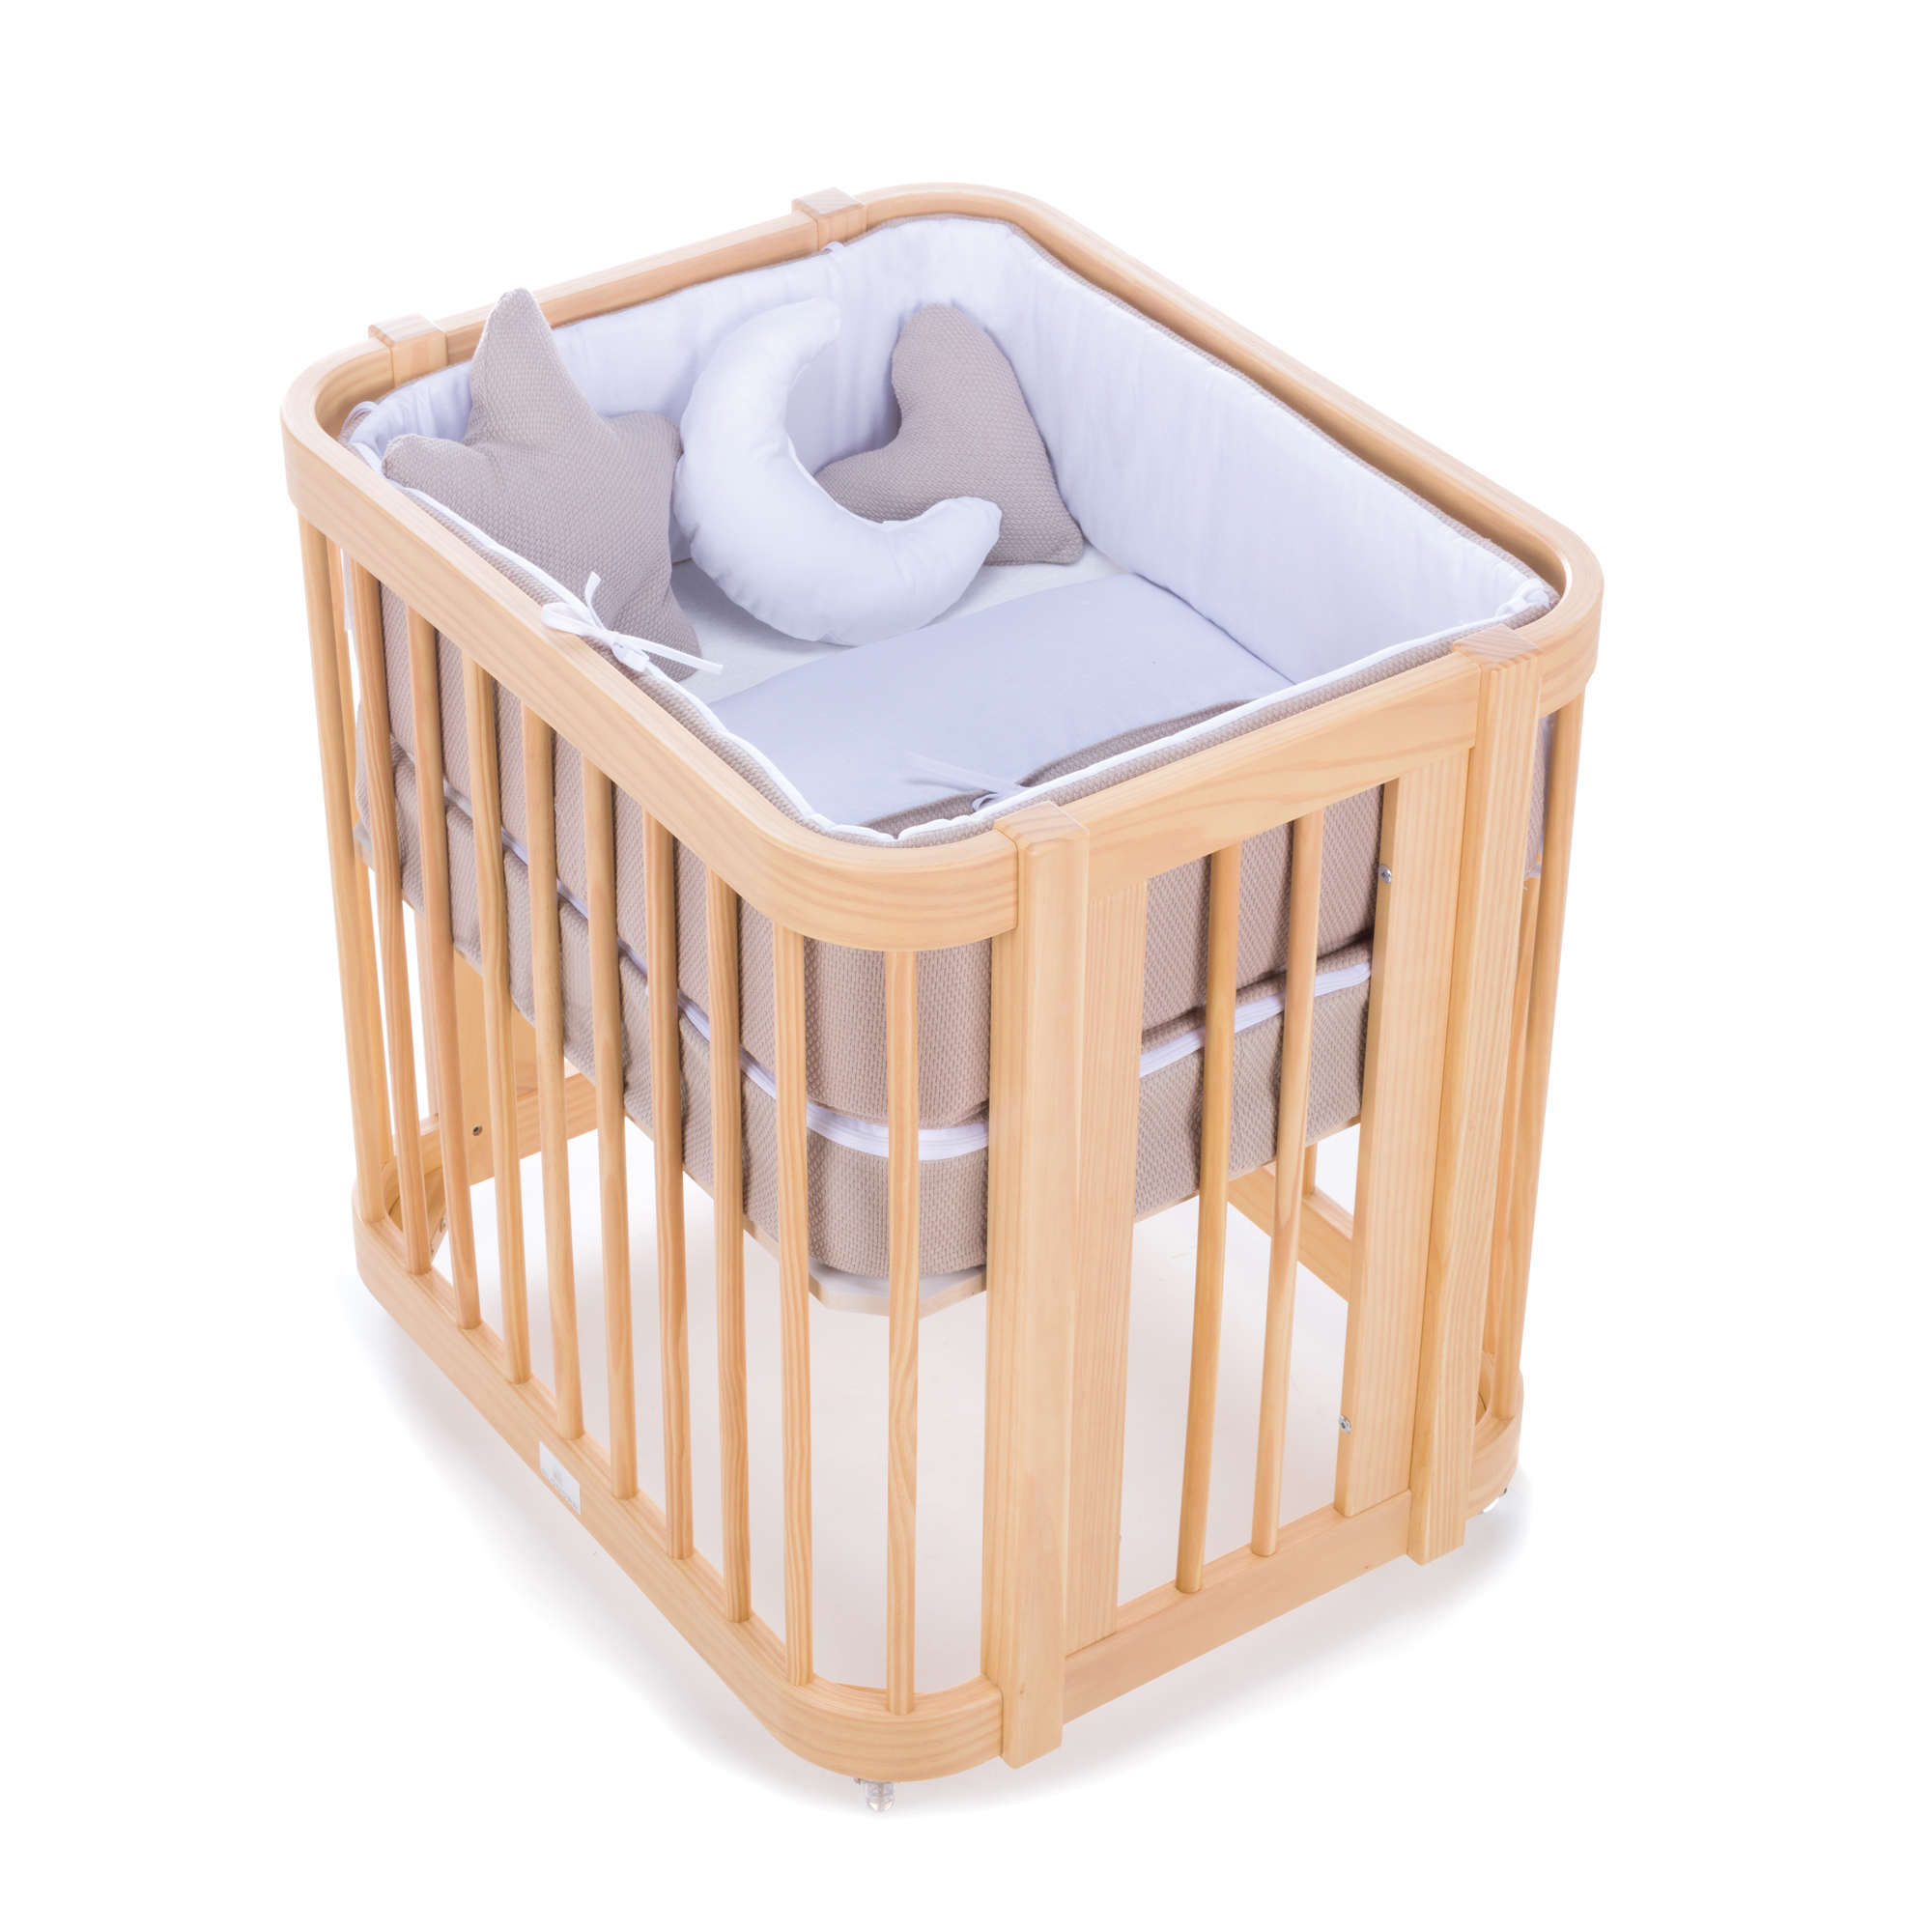 All-in-one crib-cot